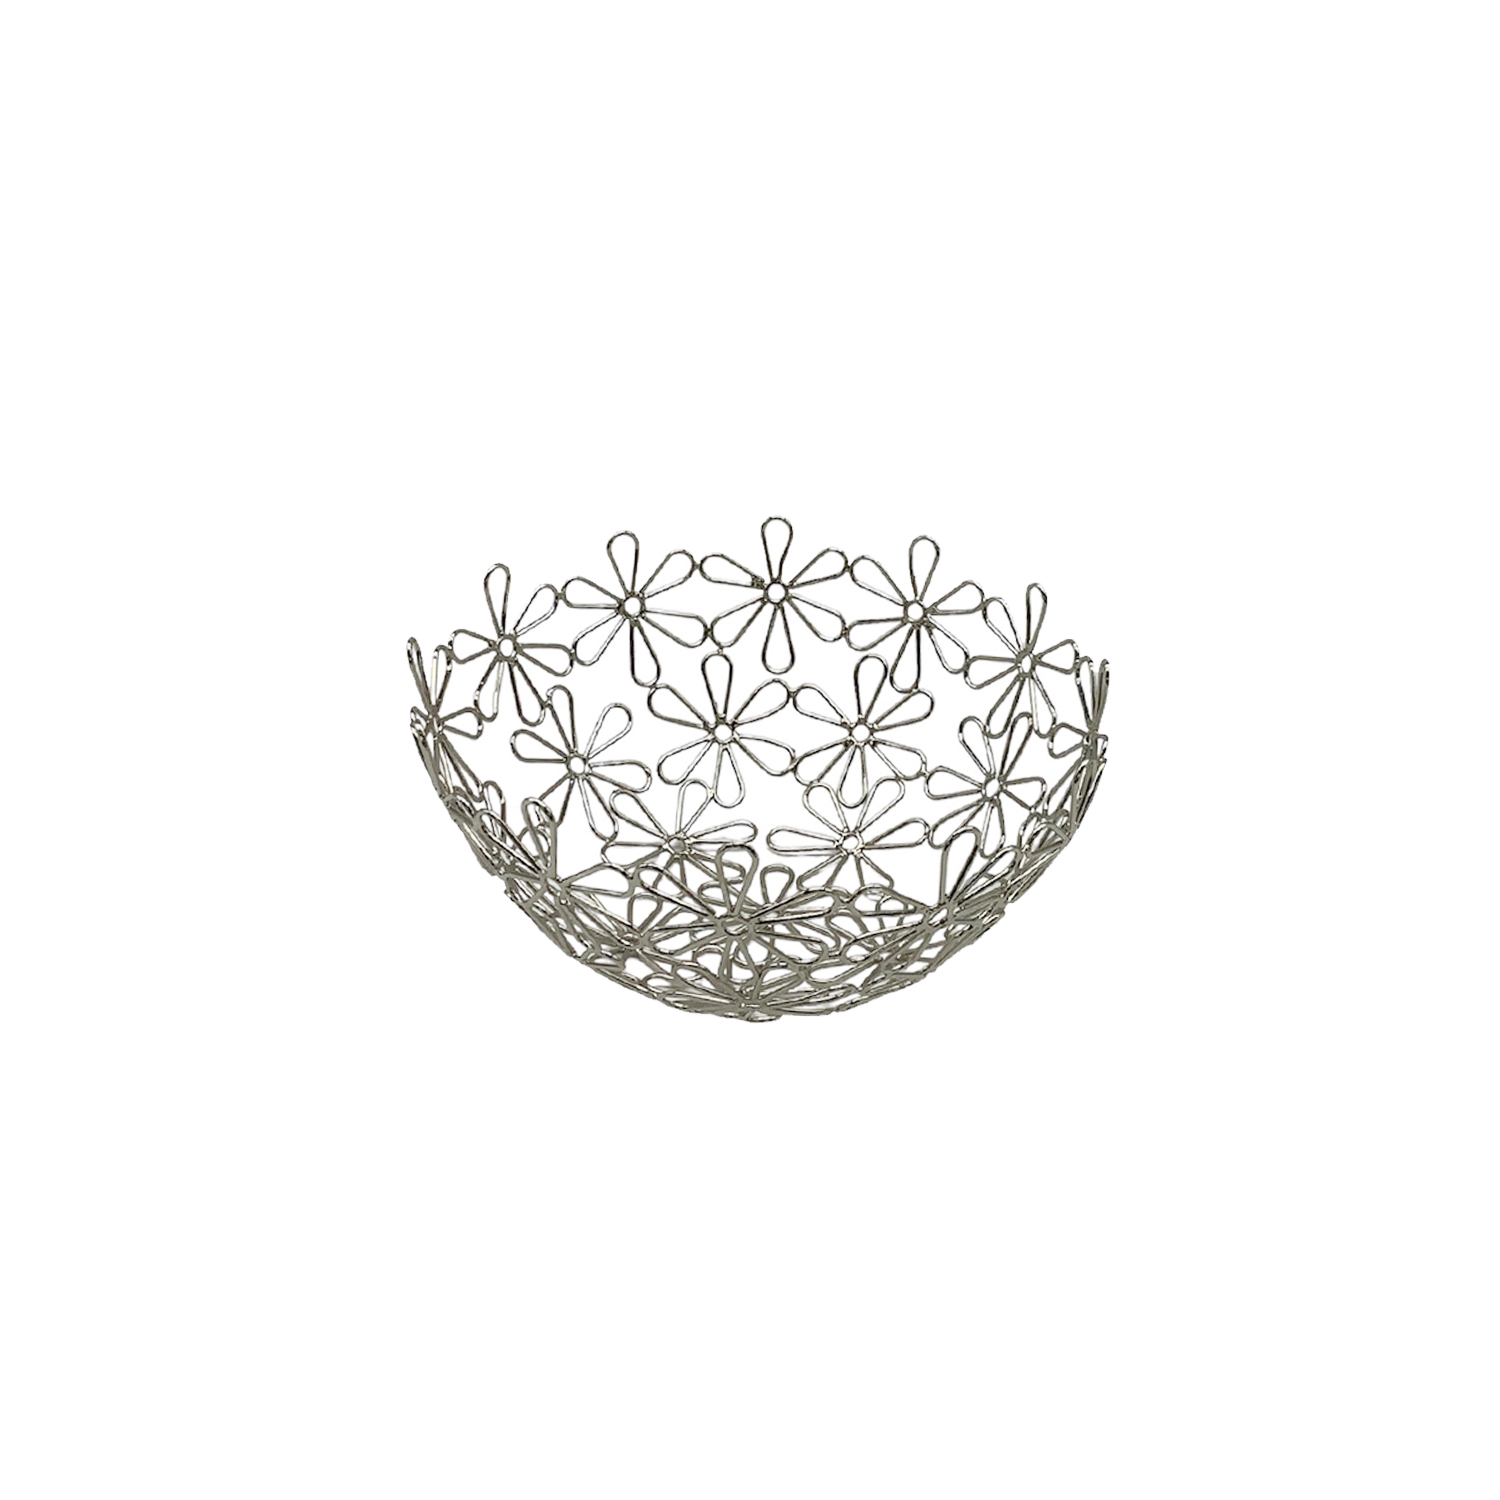 Metal Daisy Bowl Large 30.5cm Gift